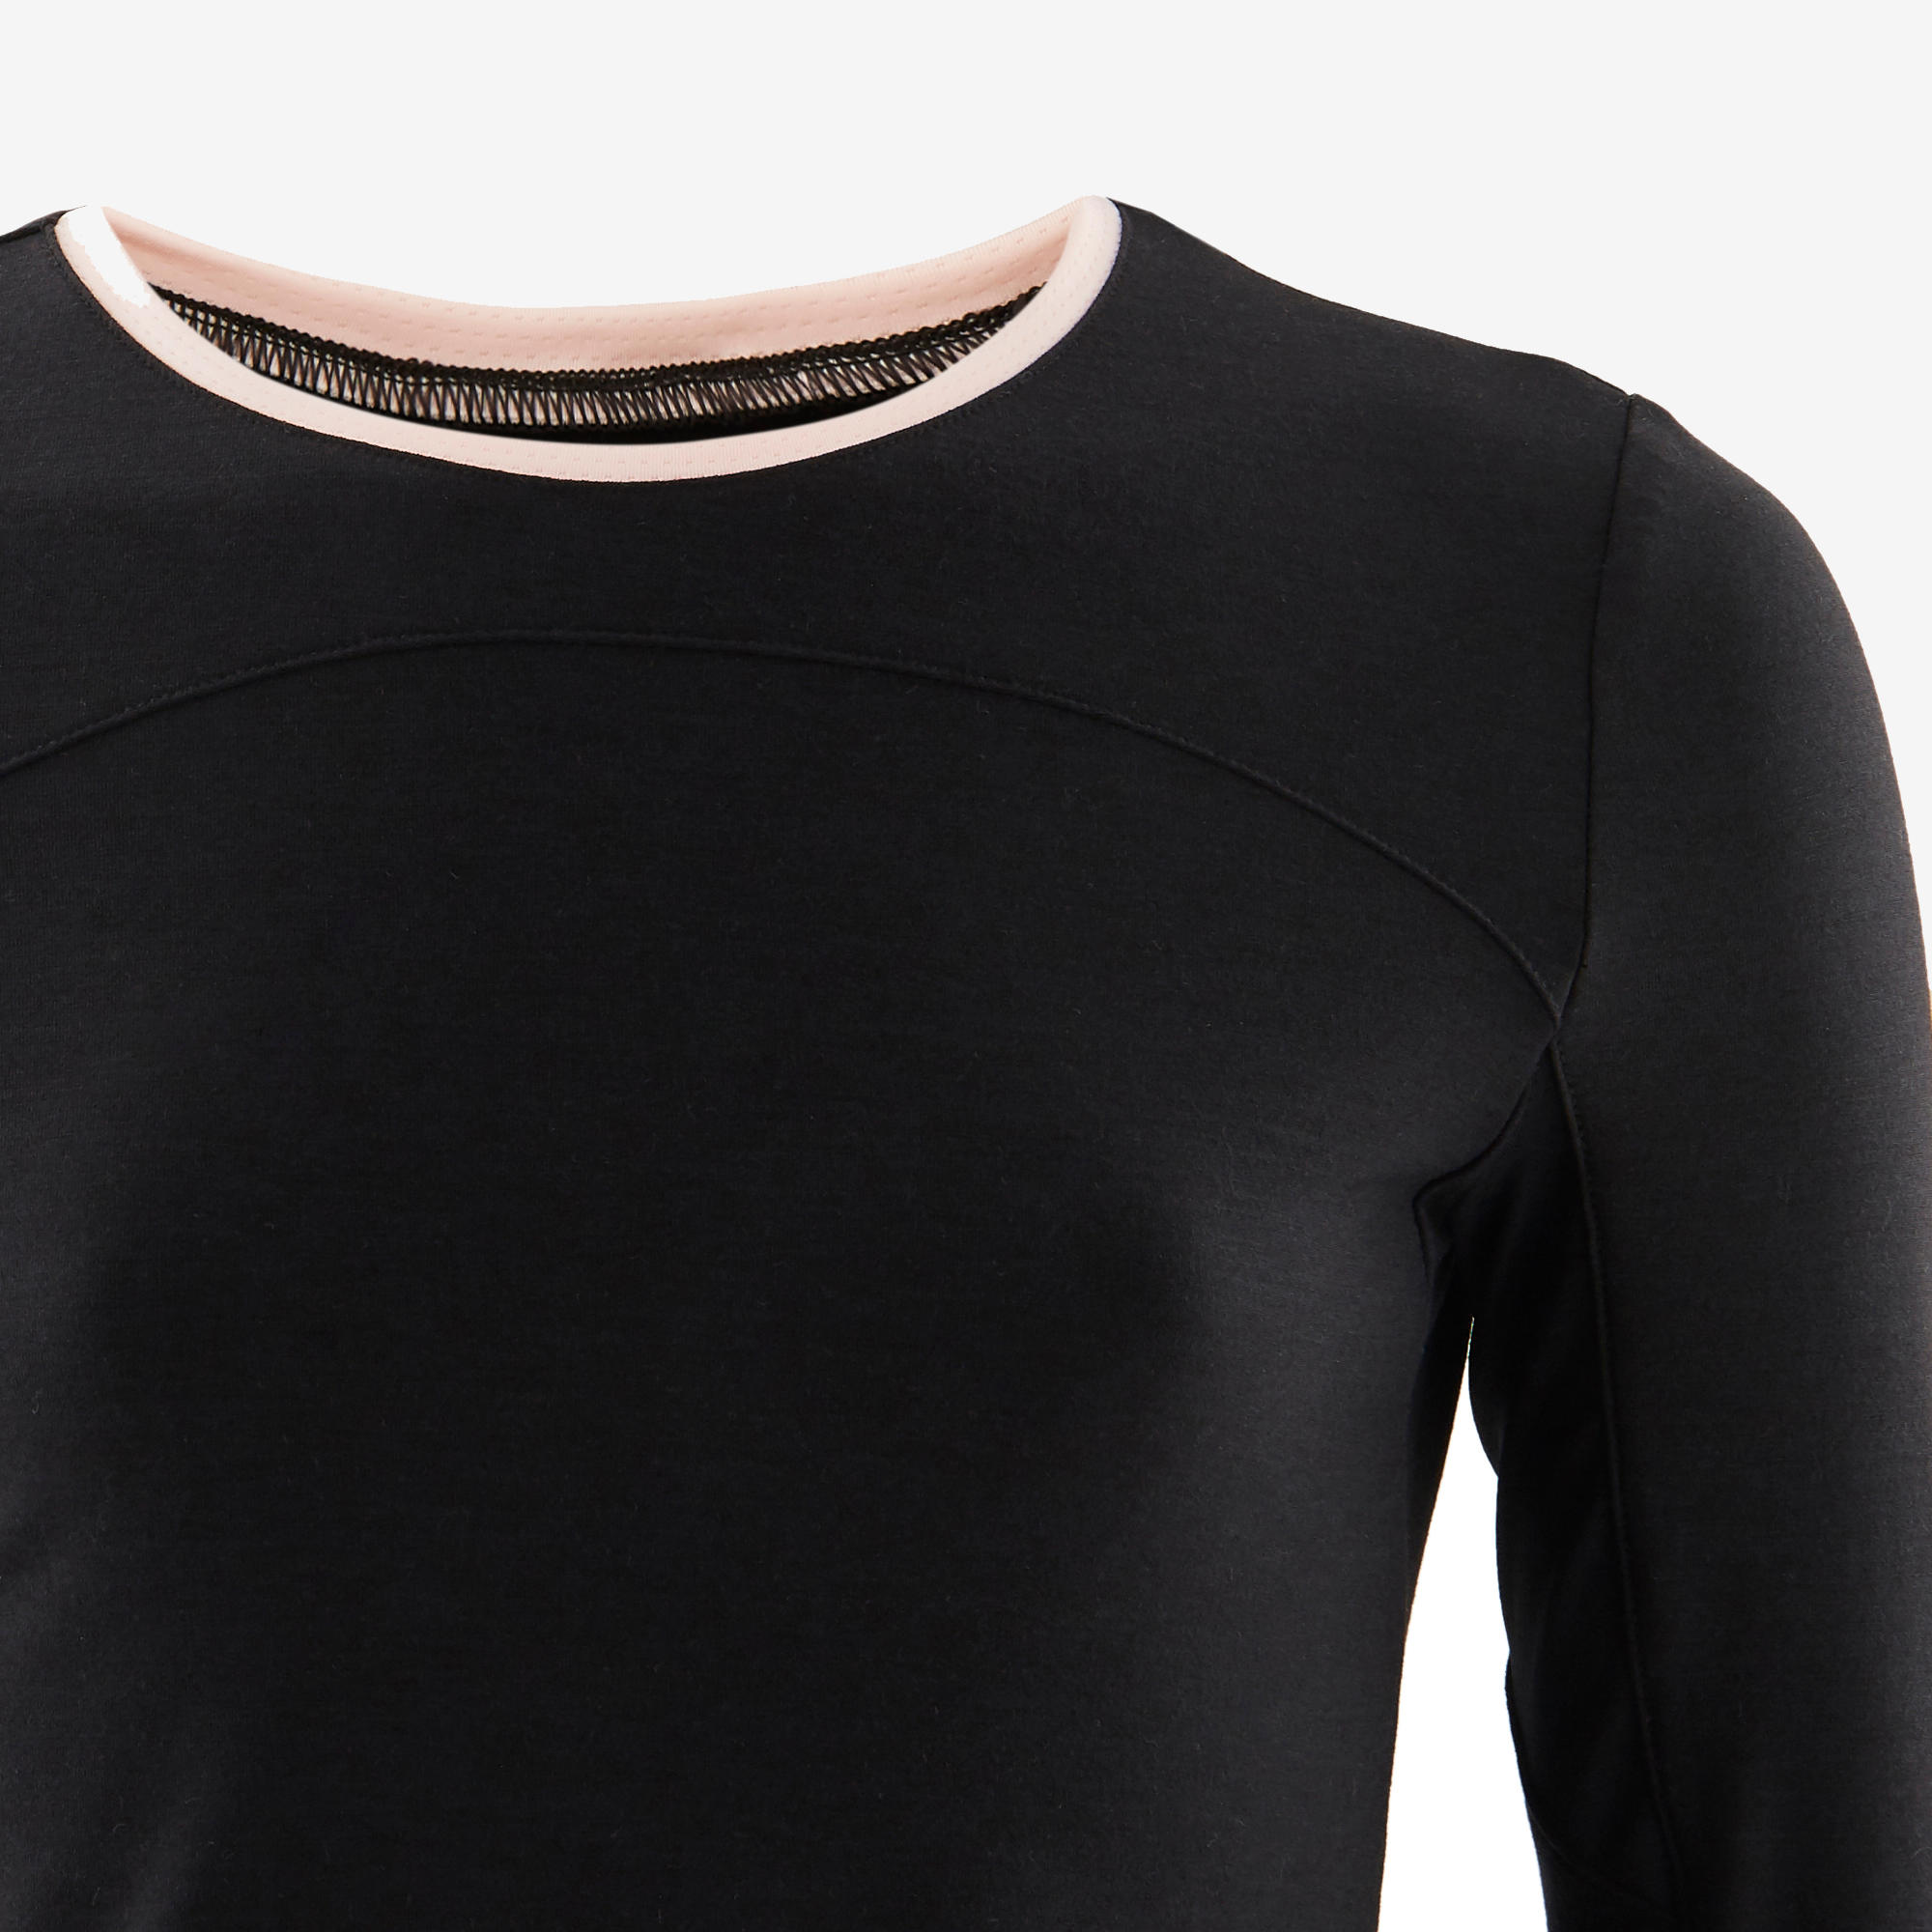 Kids' Long-Sleeved Breathable Cotton Gym T-Shirt 500 - Black/Pink 4/6